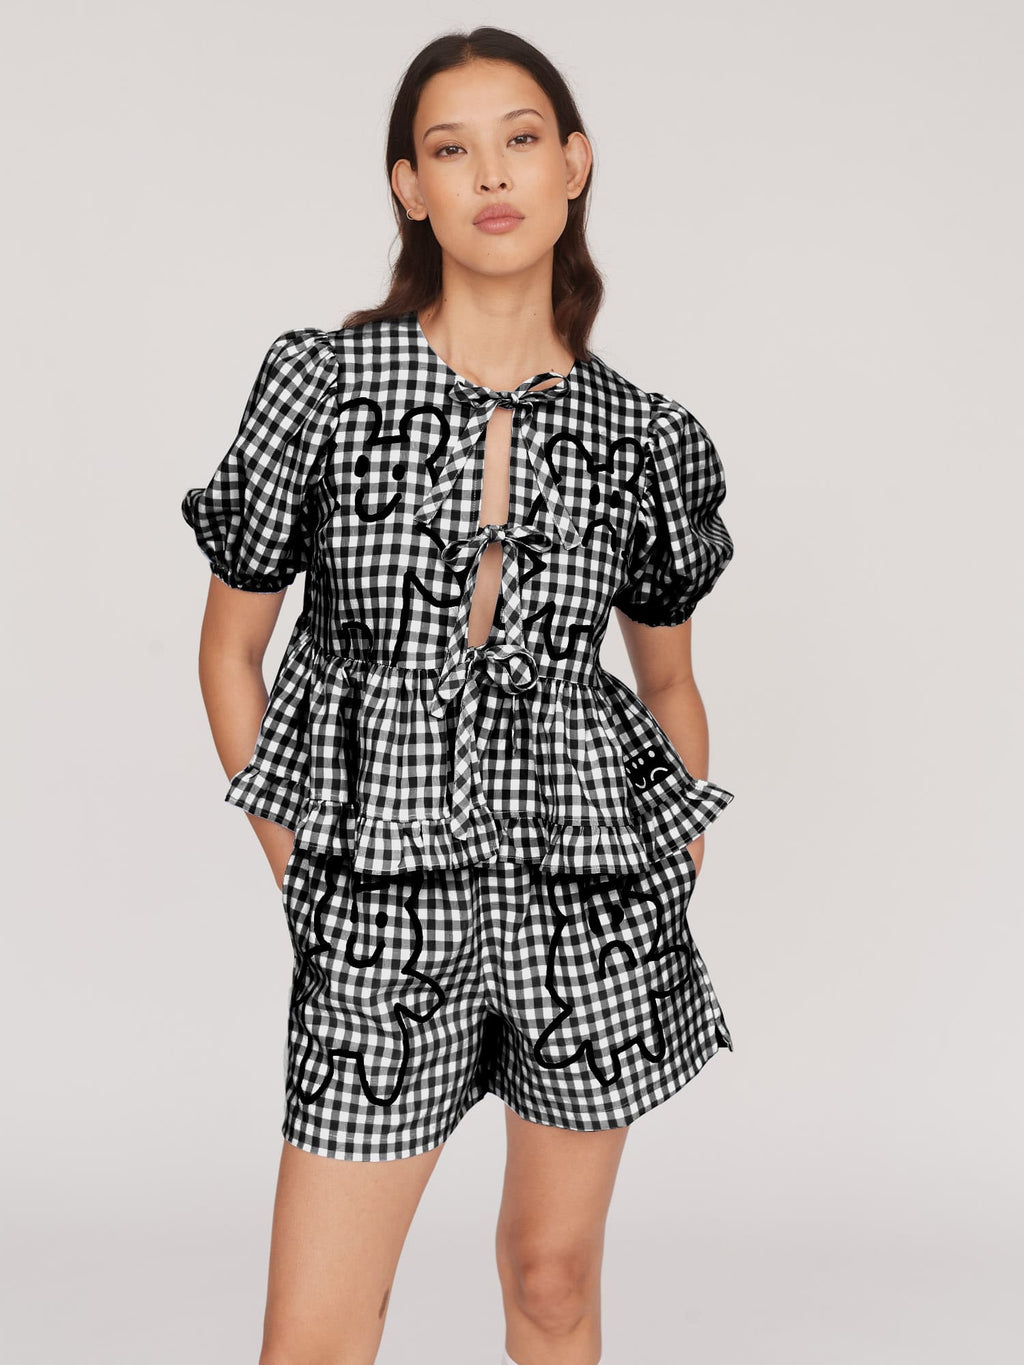 Collection-women-landing, collection-women-new-in-1, collection-womens-tops, collection-festival-fits, collection-summer-shop, collection-gingham, model:Altynay wears size S and is 5’9”